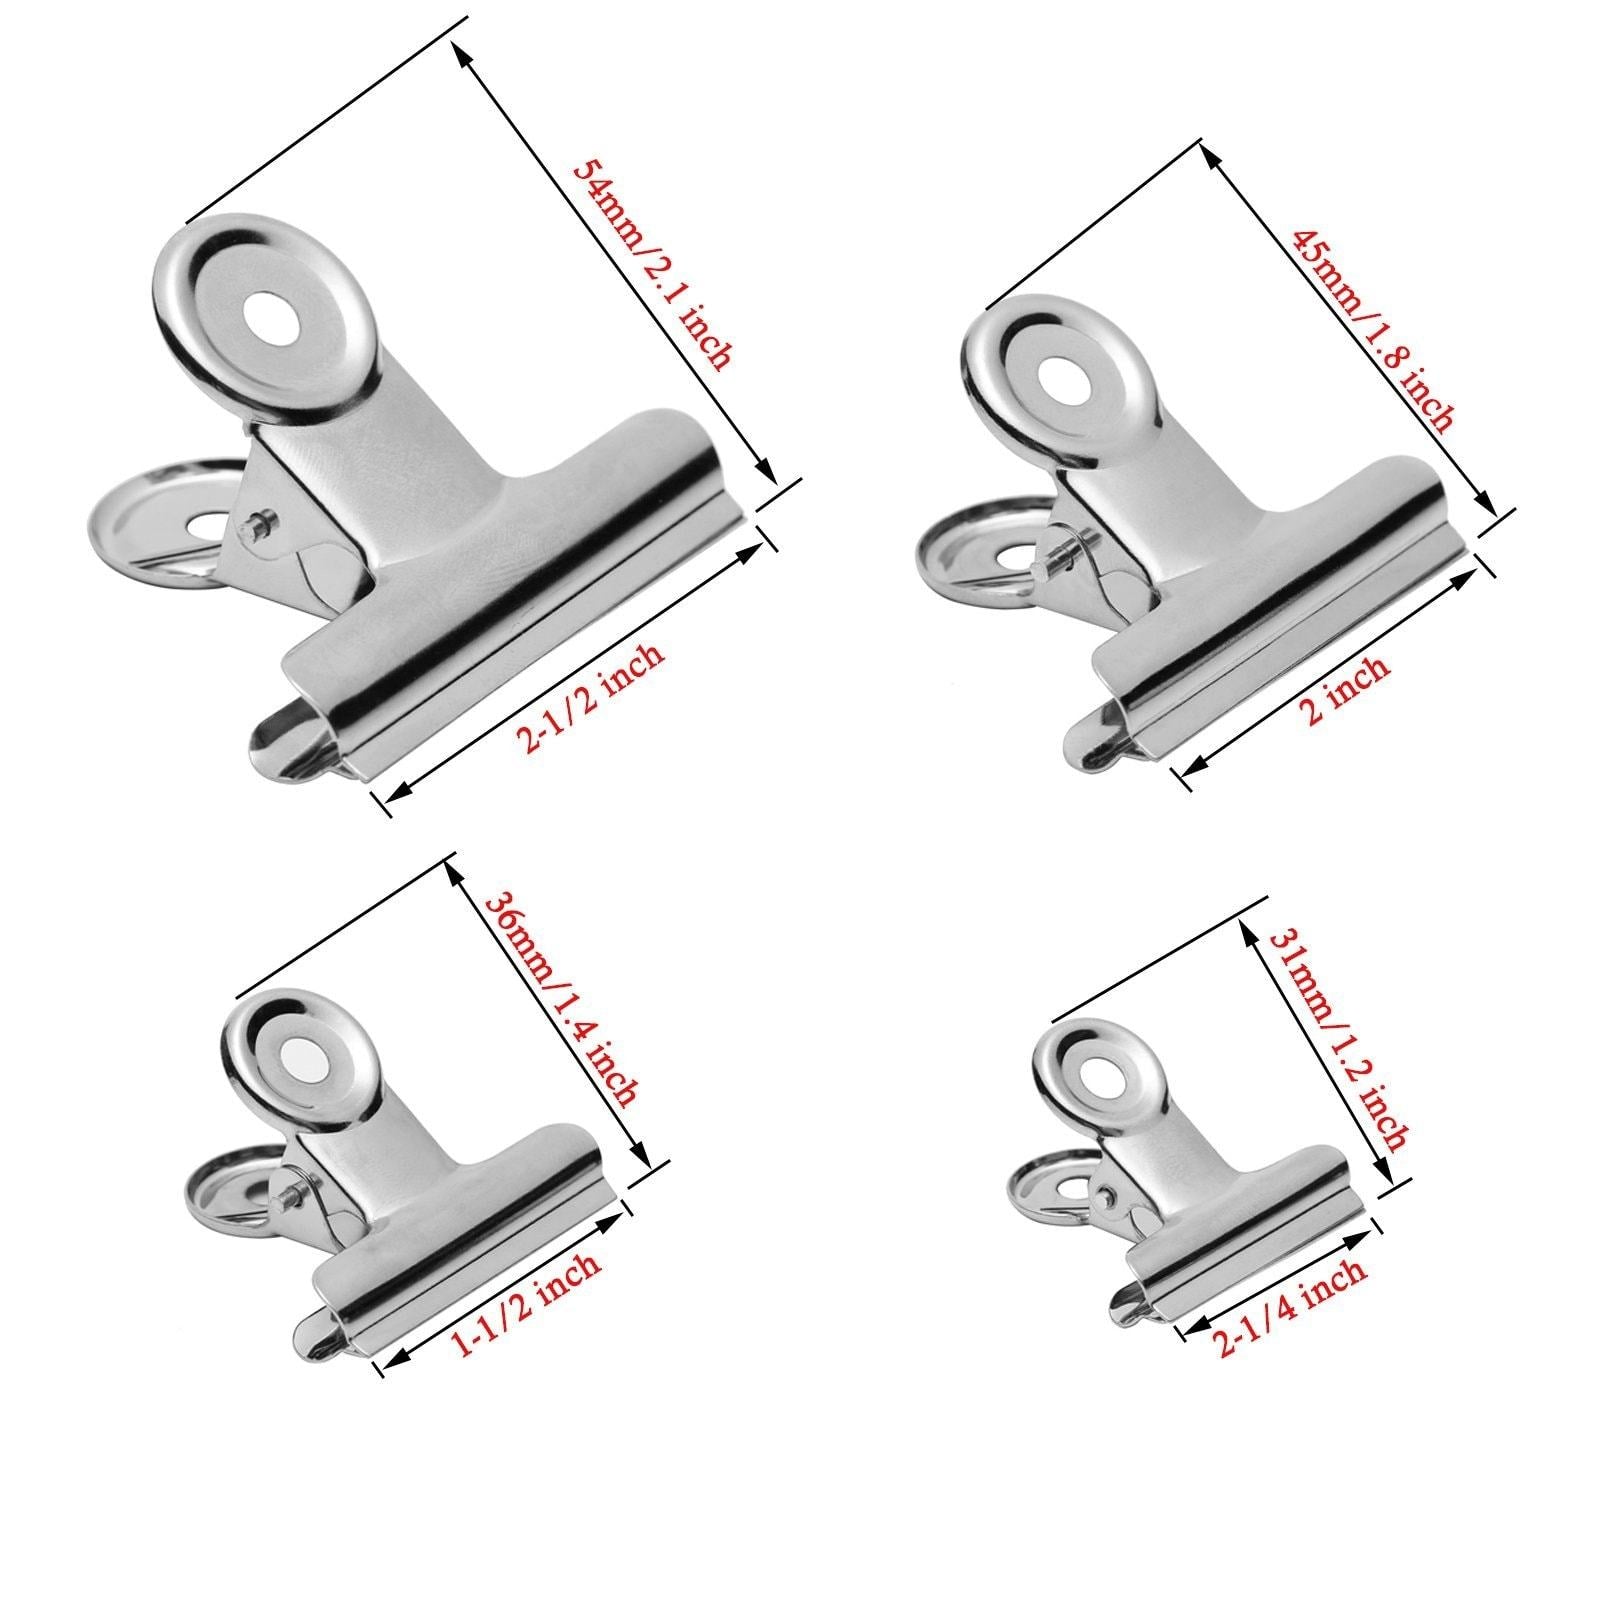 Shop here gydandir 24 pcs heavy duty stainless steel binder clips hinge clips for documents files pictures chip bags home office school kitchen supplies assorted 4 size silver